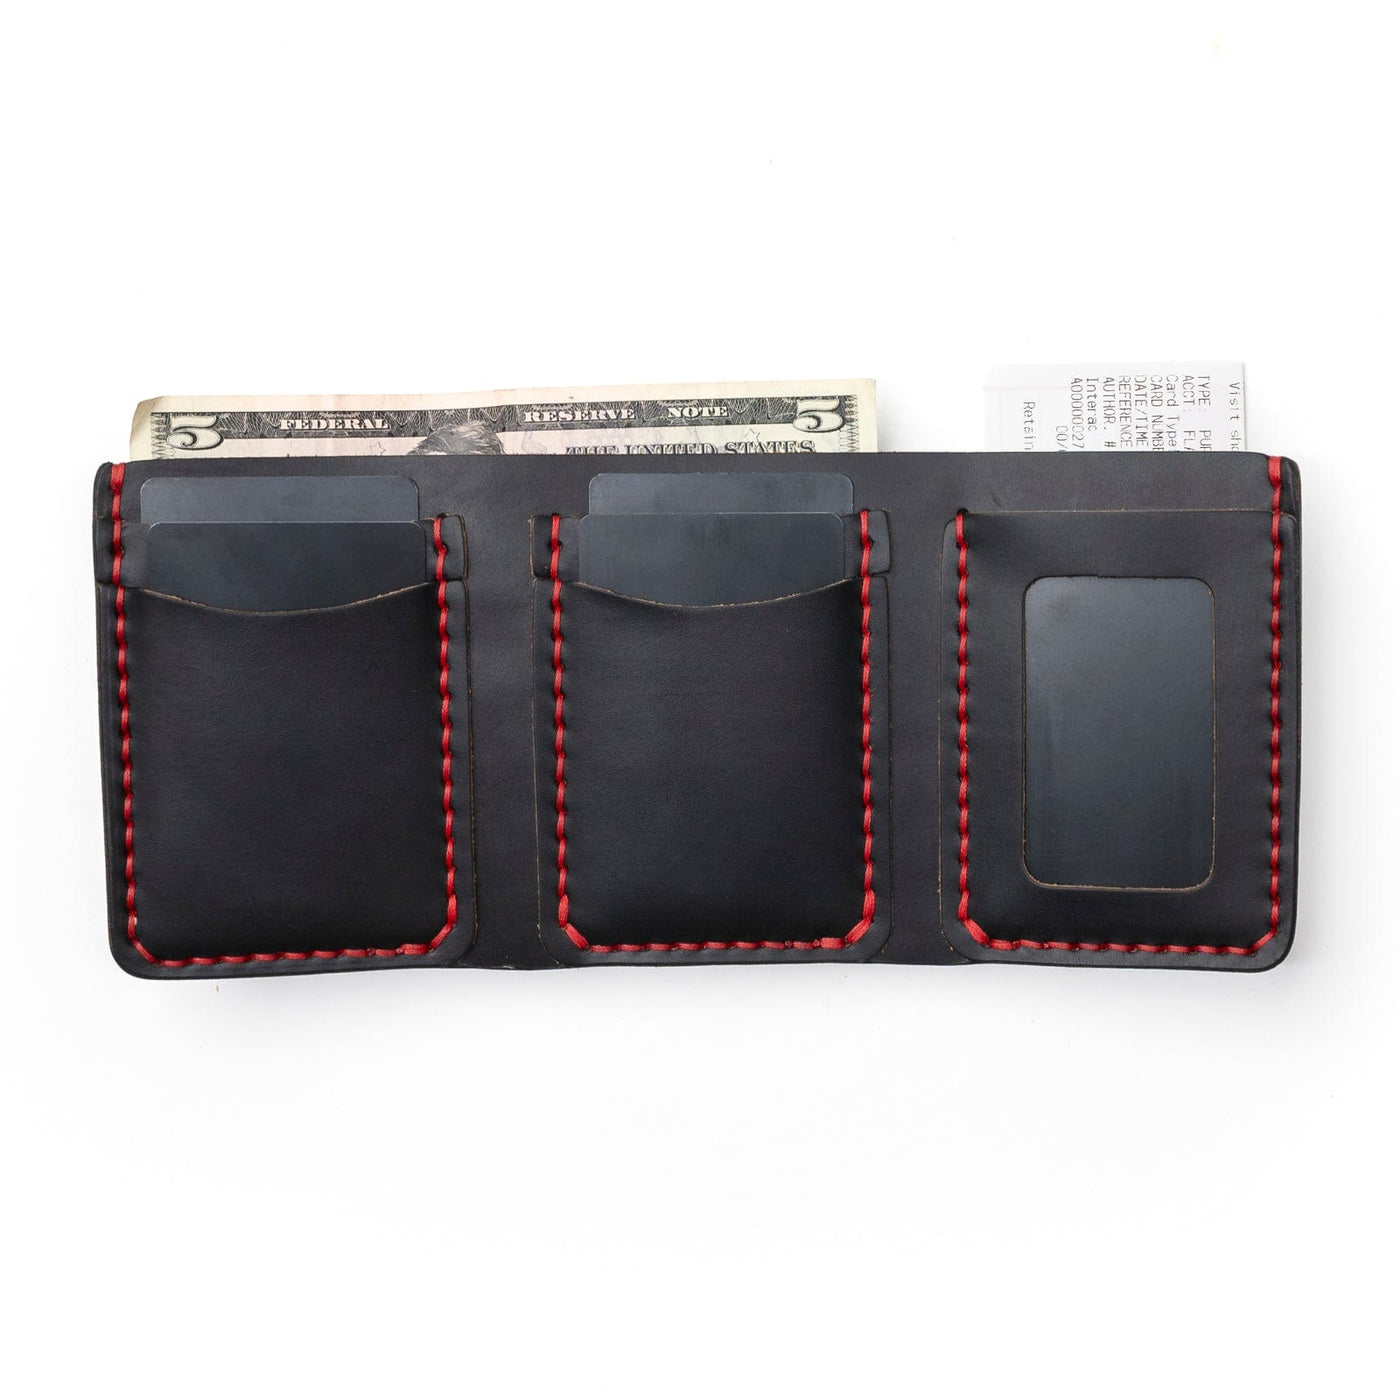 Leather Trifold Wallet - Black Popov Leather